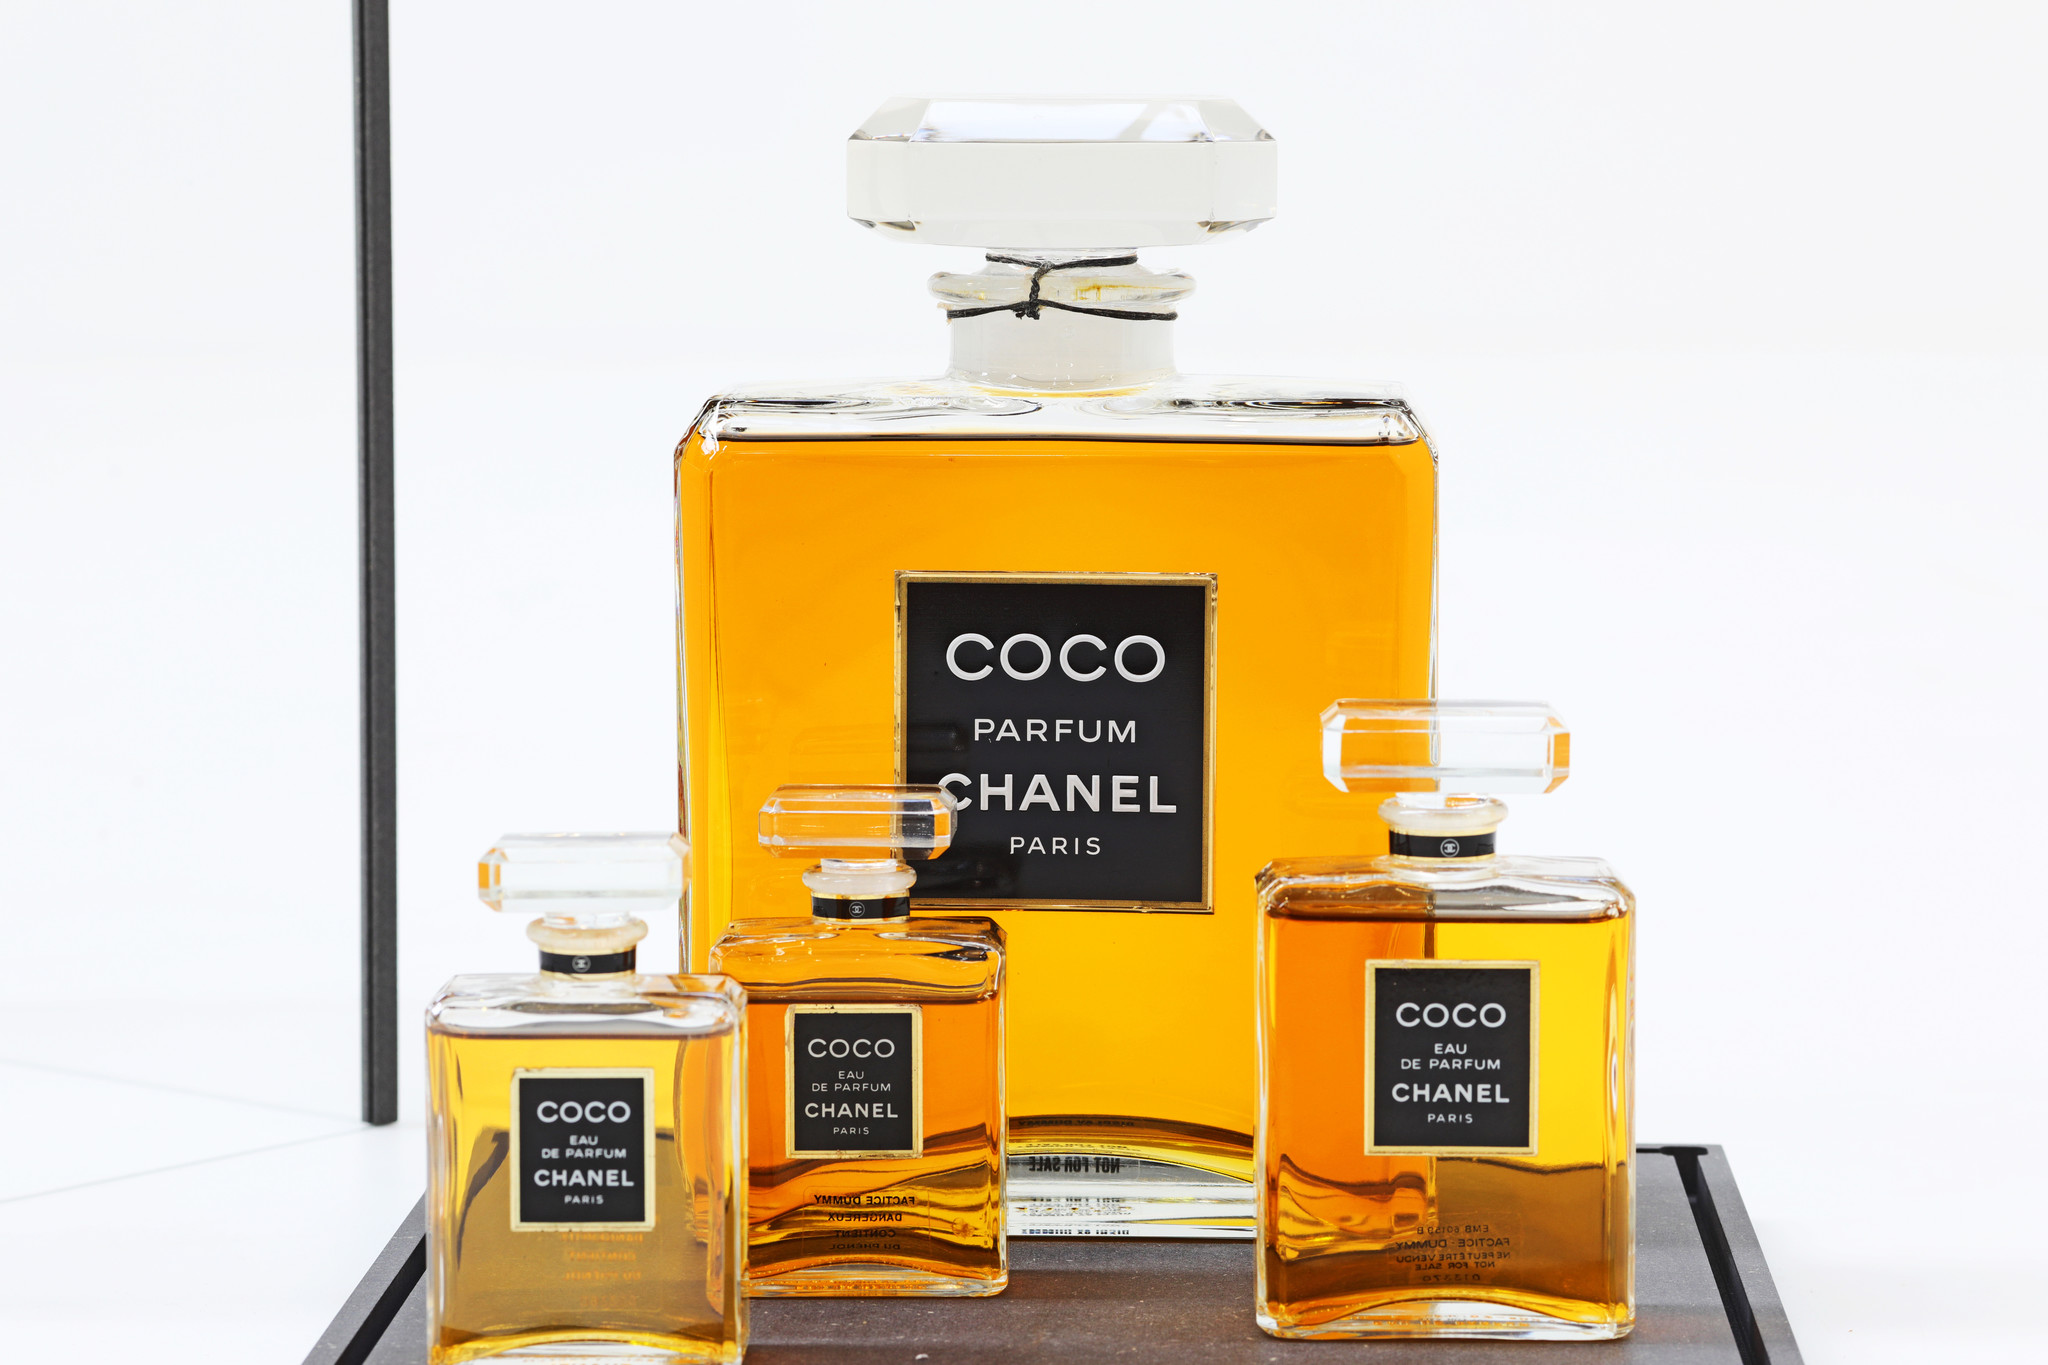 Chanel Coco Collection bottles in display case